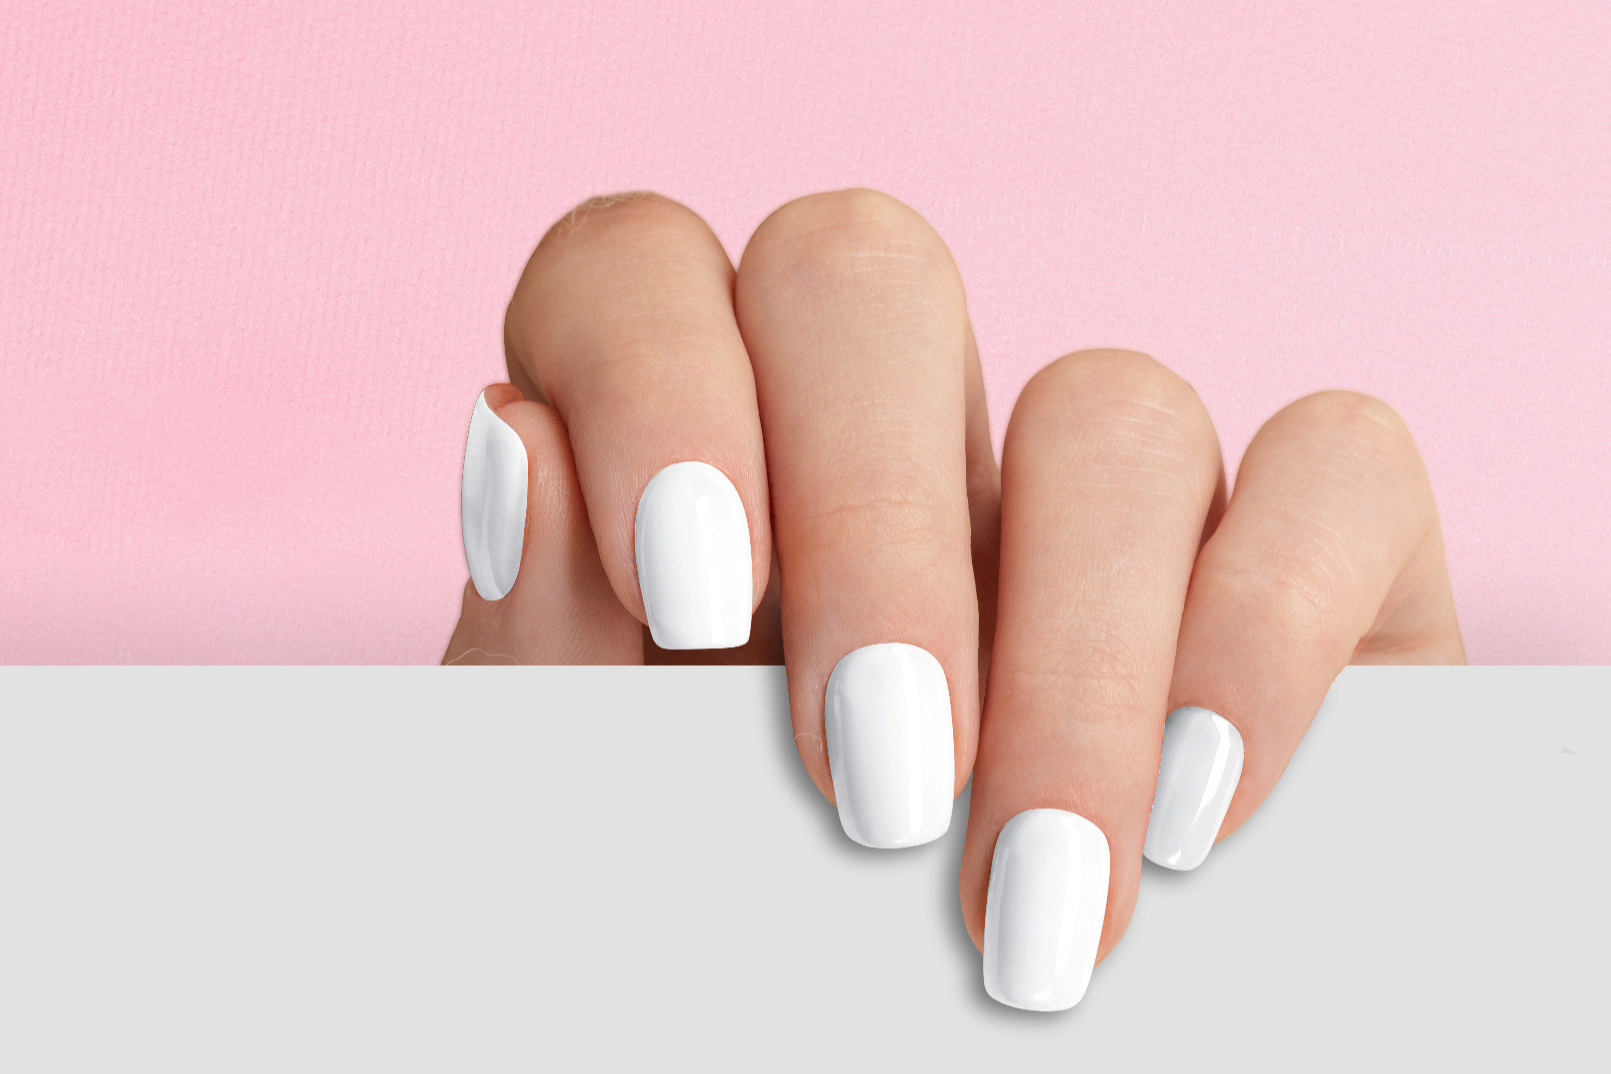 On short nails, white color looks better with a “soft square” shape.